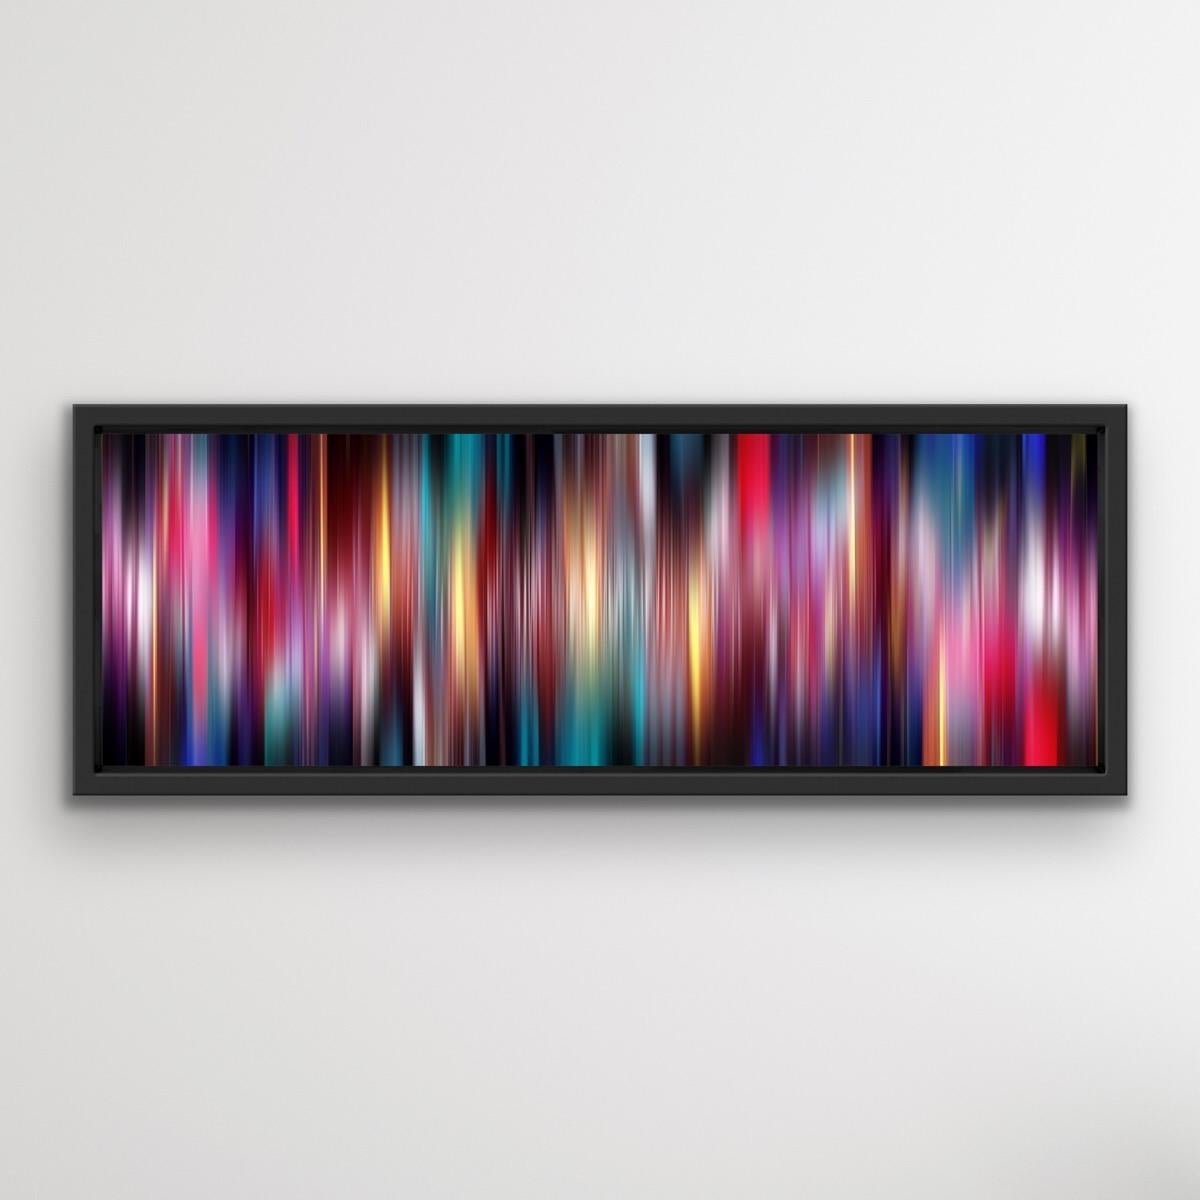 Killer Kisses, Colourful Abstract Art, Contemporary Abstract Statement Art - Black Abstract Print by Allan Forsyth